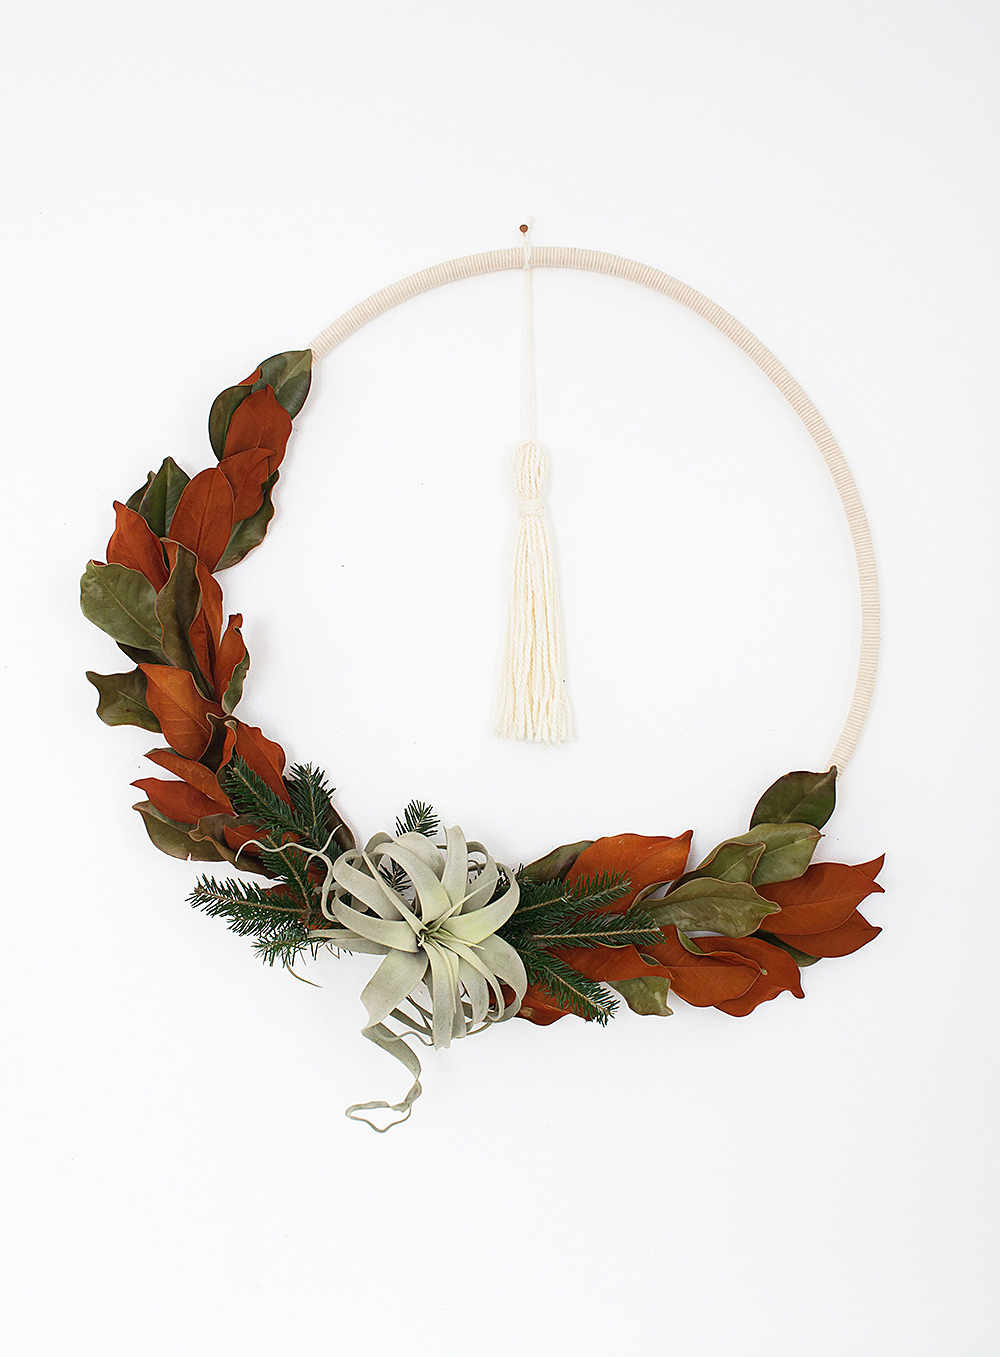 DIY Boho Winter Hula Hoop Wreath - Complete your modern Scandibo holiday decor with this simple yet stunning wreath made with fresh greens, cord, and an air plant!